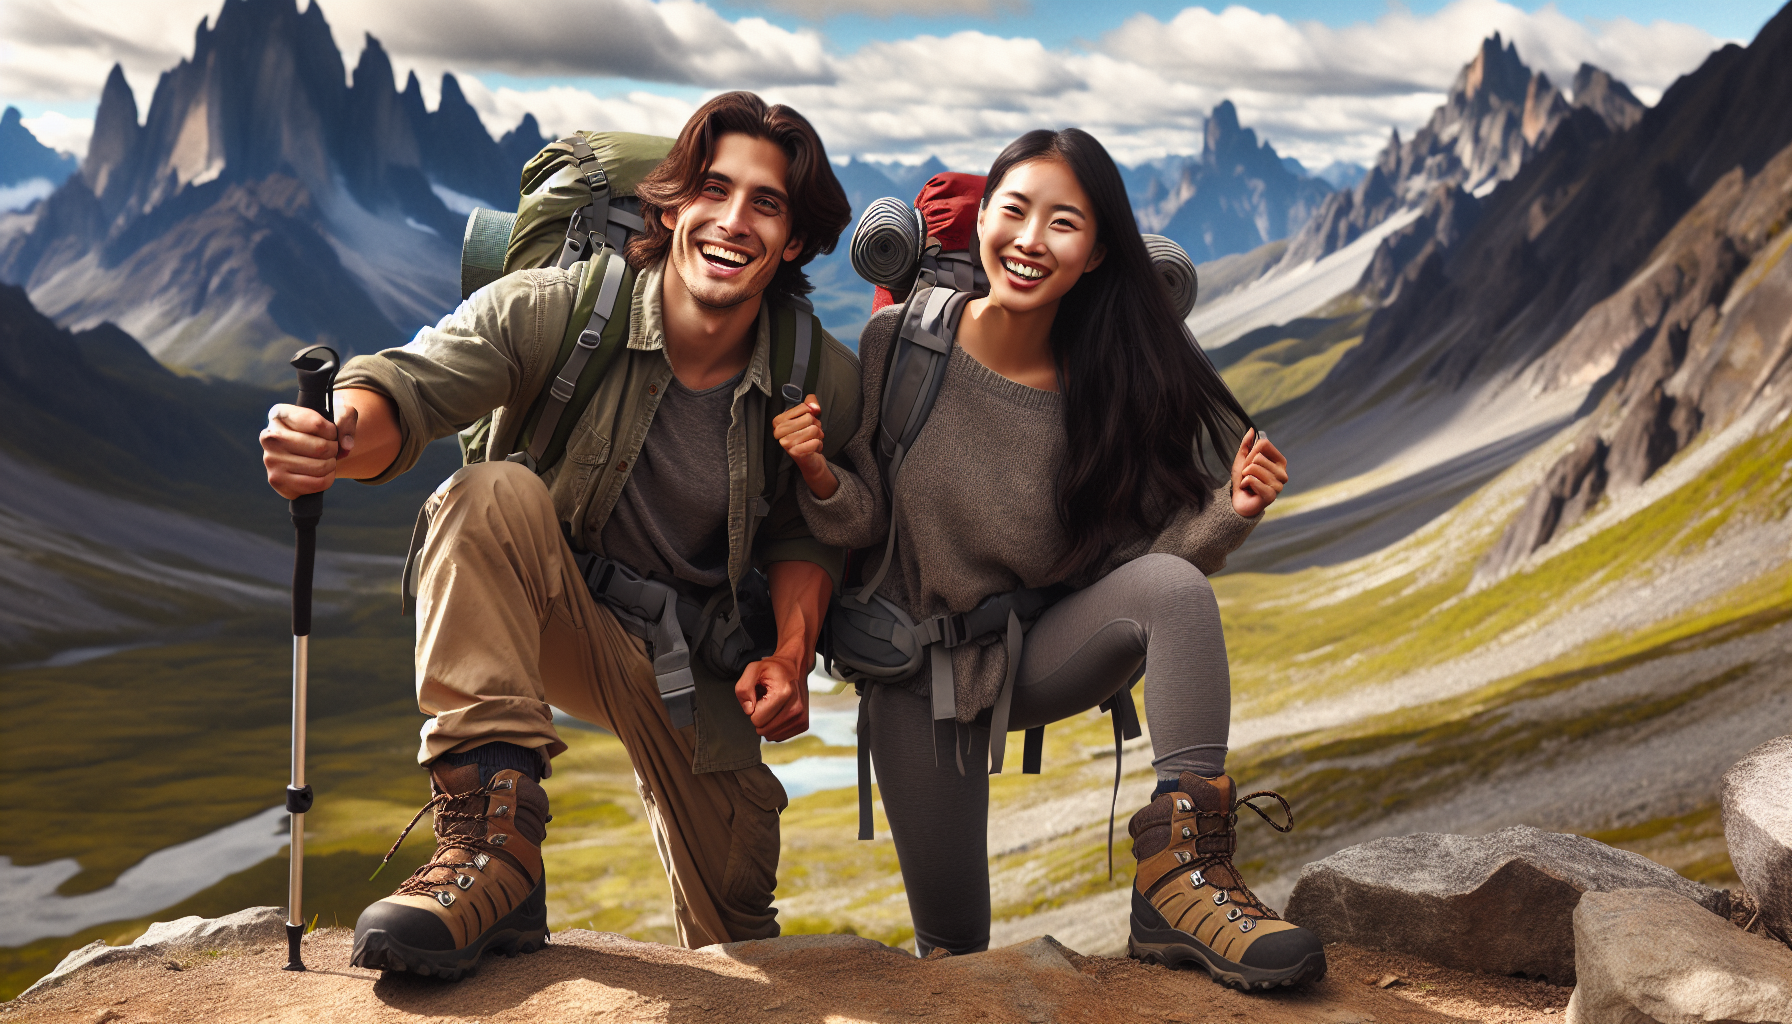 How Can I Prepare Physically And Mentally For Challenging Hikes With My Boyfriend?